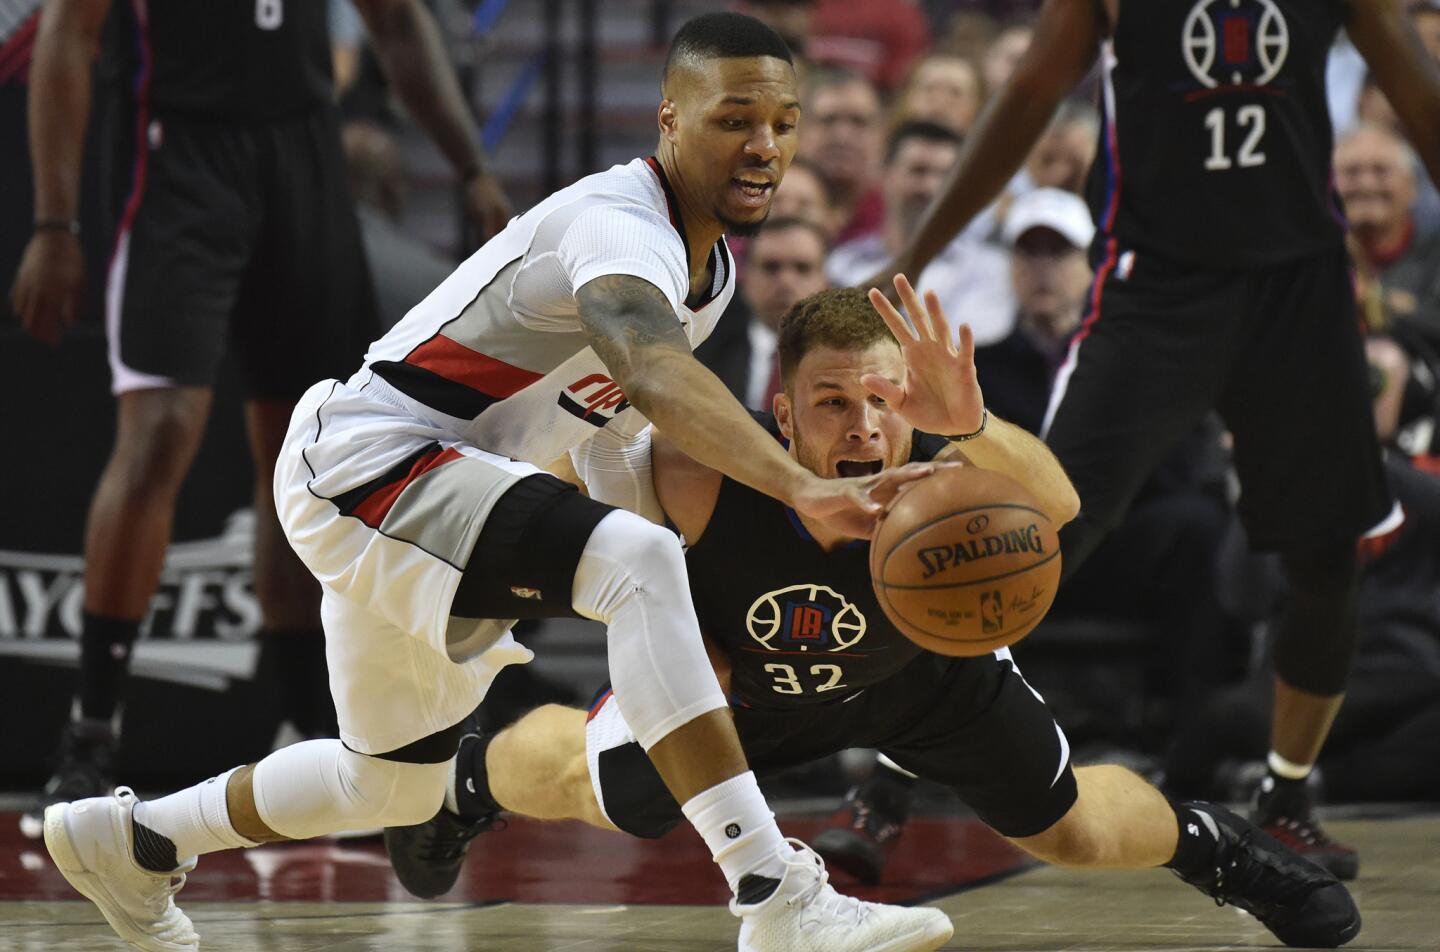 Key numbers in the Clippers' 98-84 loss to the Trail Blazers in Game 4